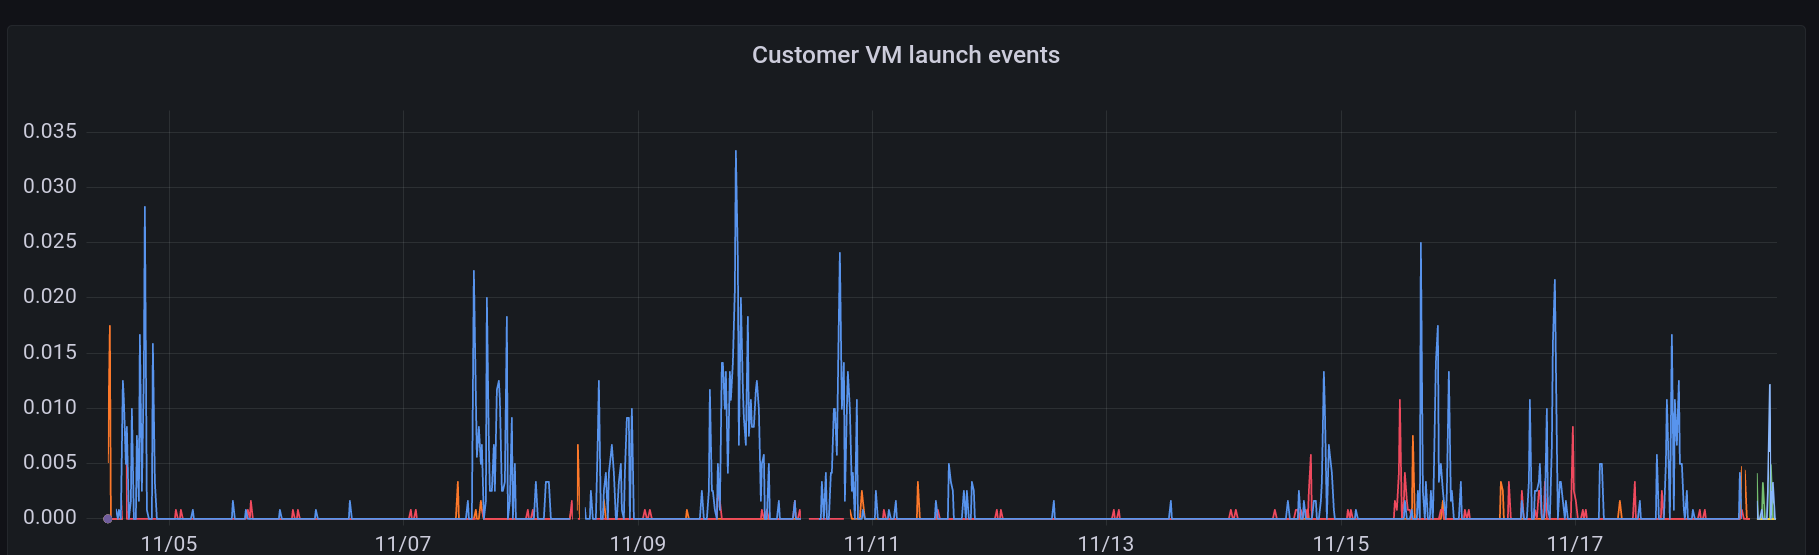 VMs launched over the past several days